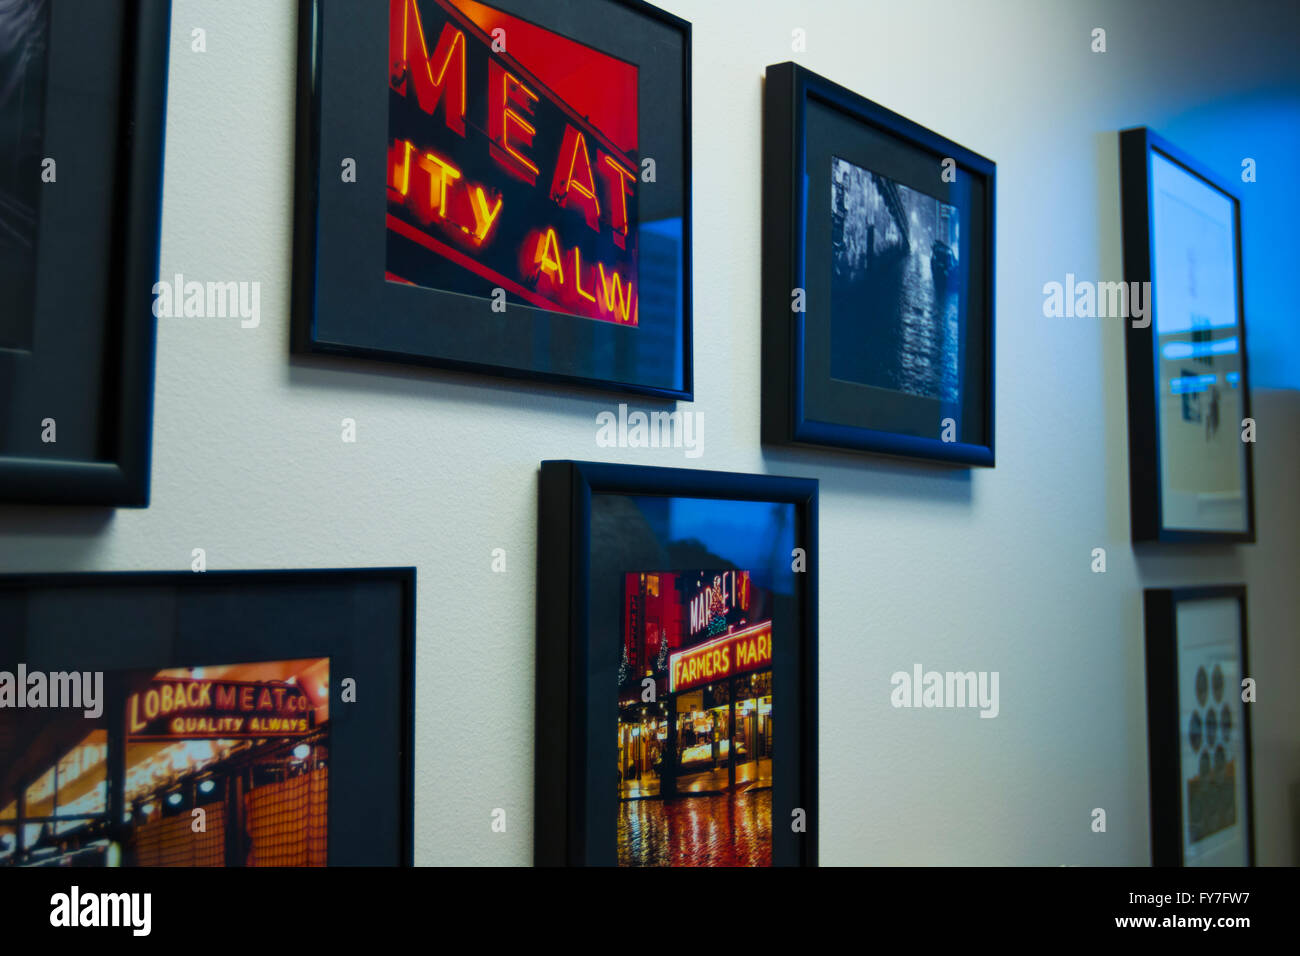 Pictures Frames On The Wall Stock Photo